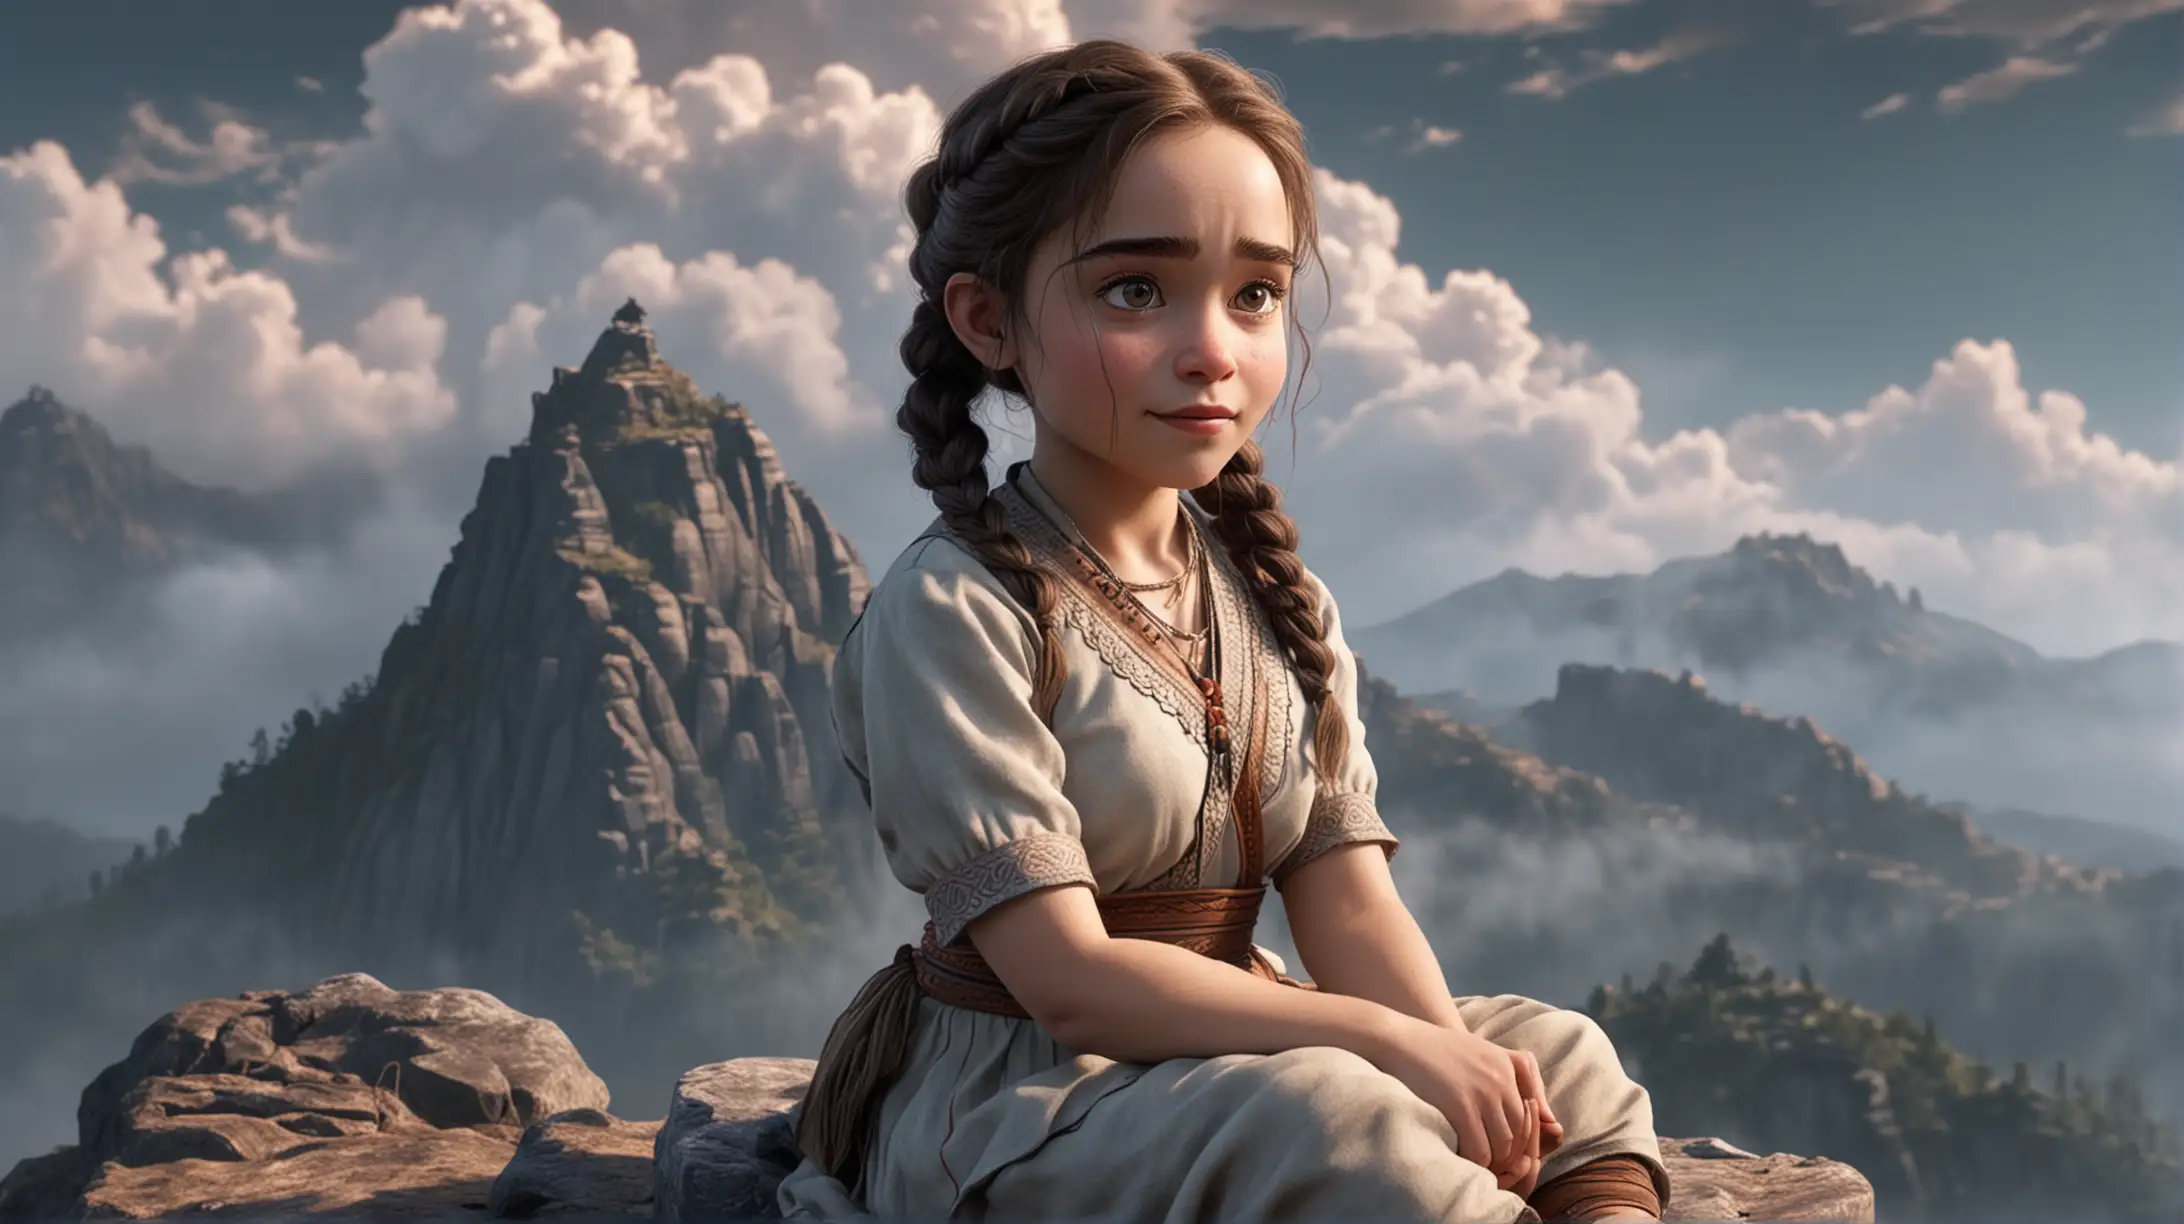 cartoon, Emilia Clarke as indian girl sit on top of a mountain, close-up, clouds, fog, pigtails